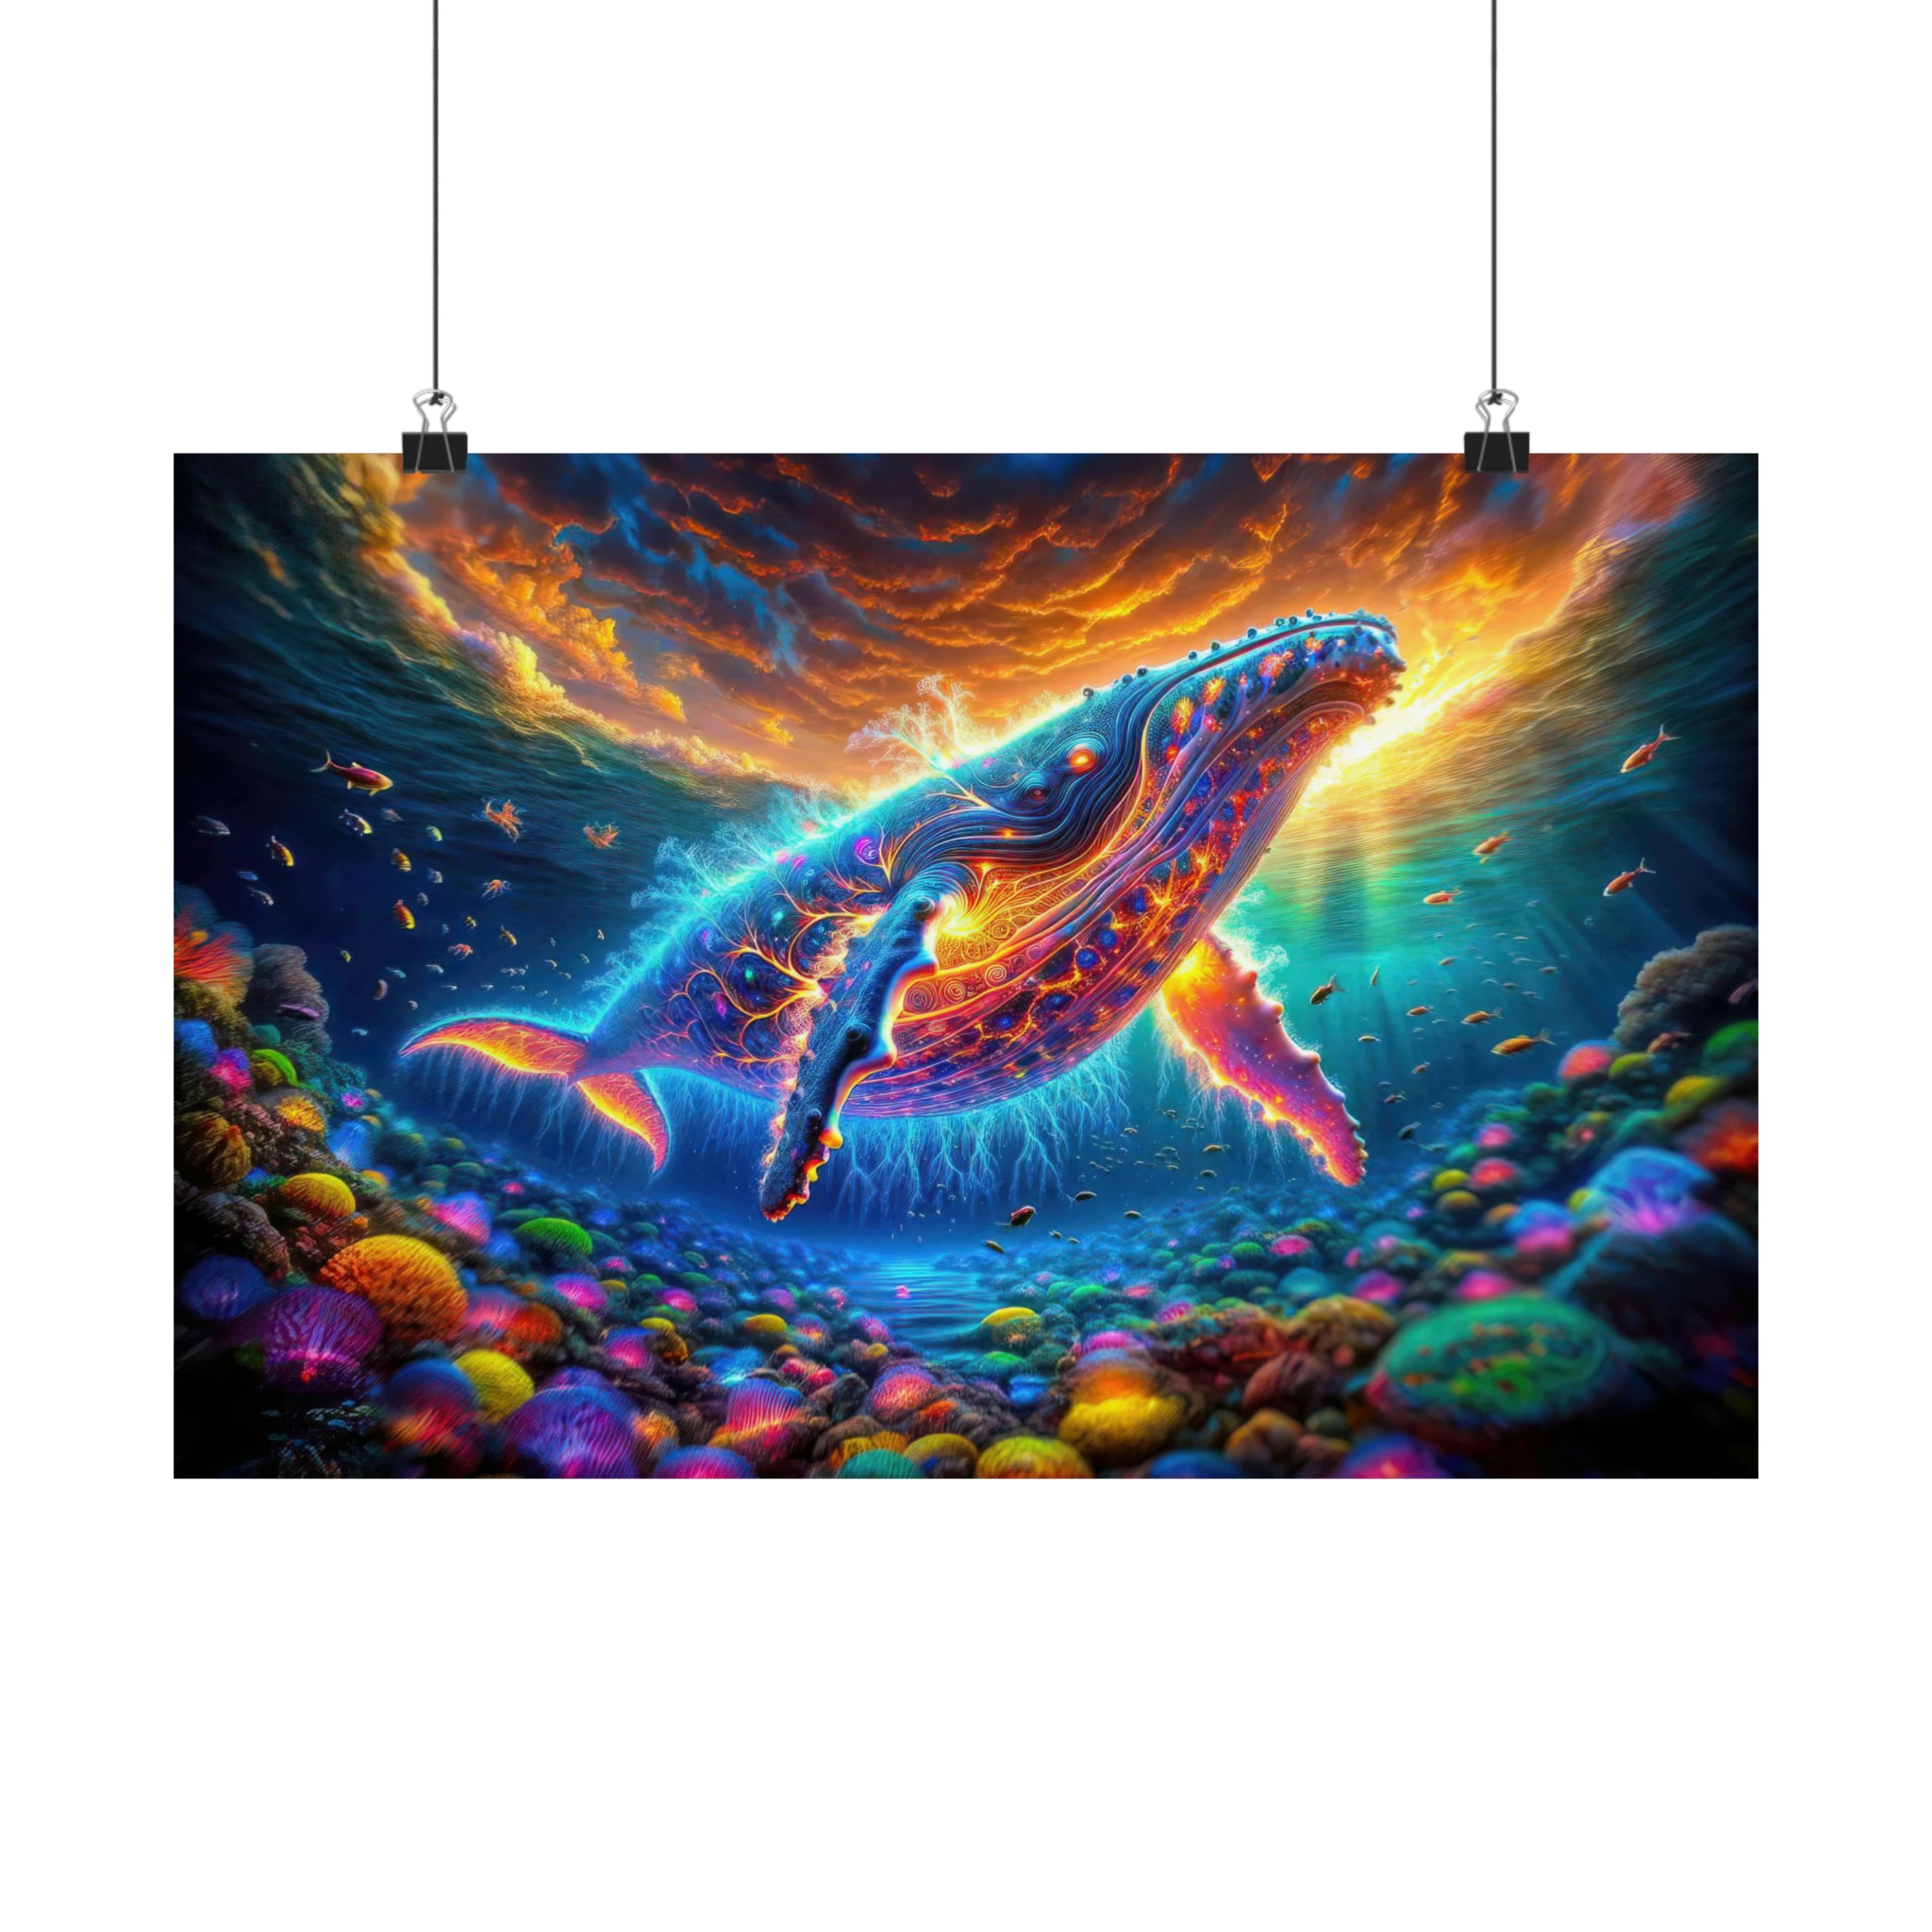 Cosmic Dance of the Humpback Whale Poster